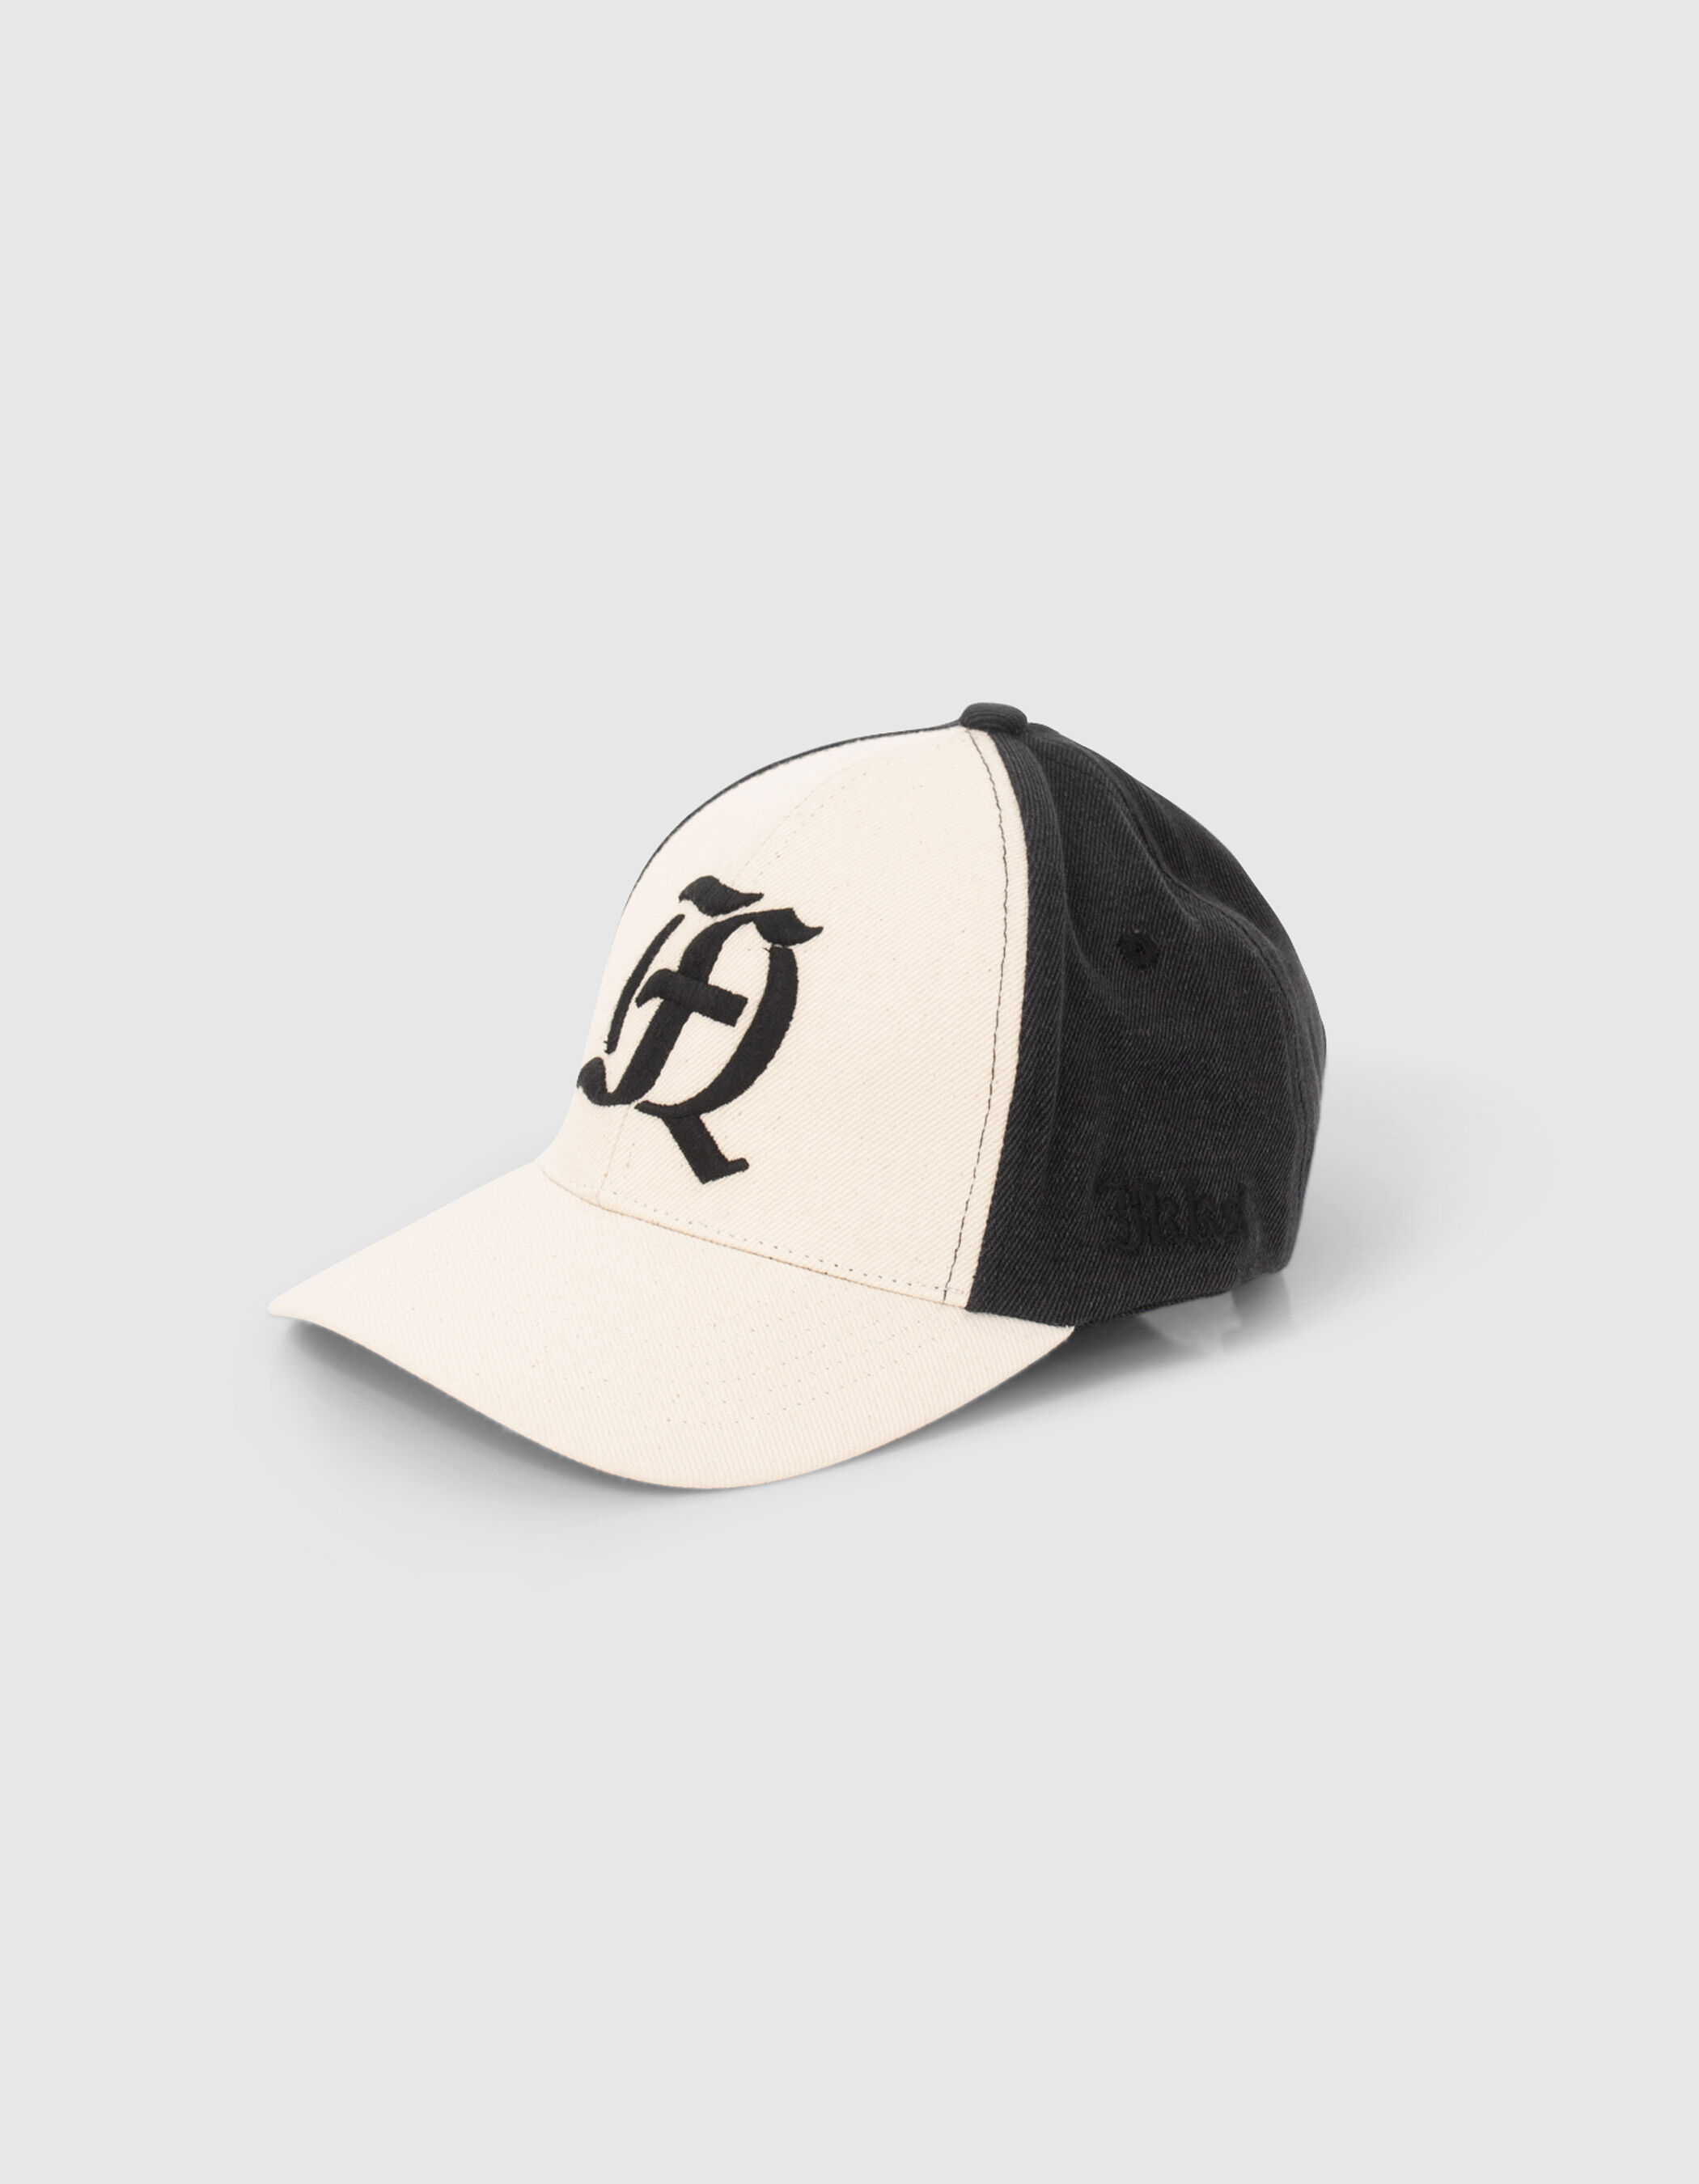 Men's ivory and black FQ-embroidered cap